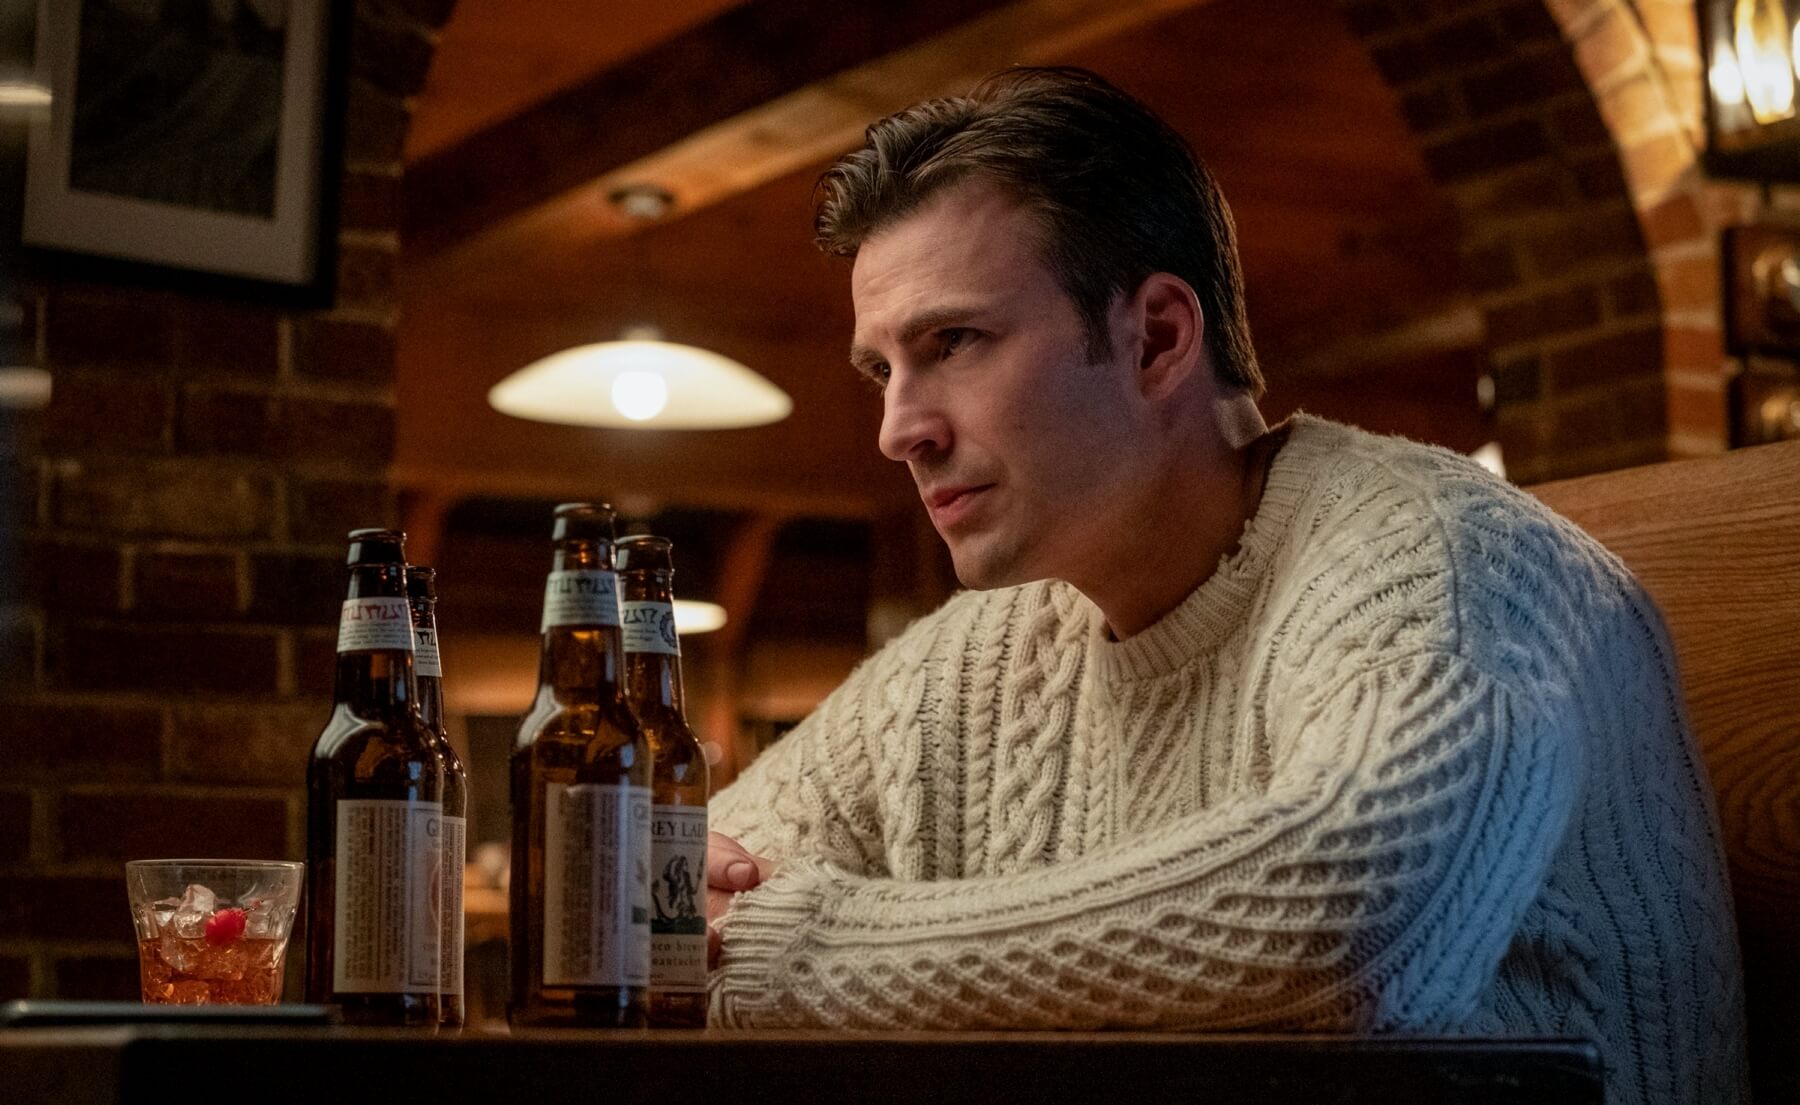 Chris Evan in a Peregrine sweater in Knives Out movie